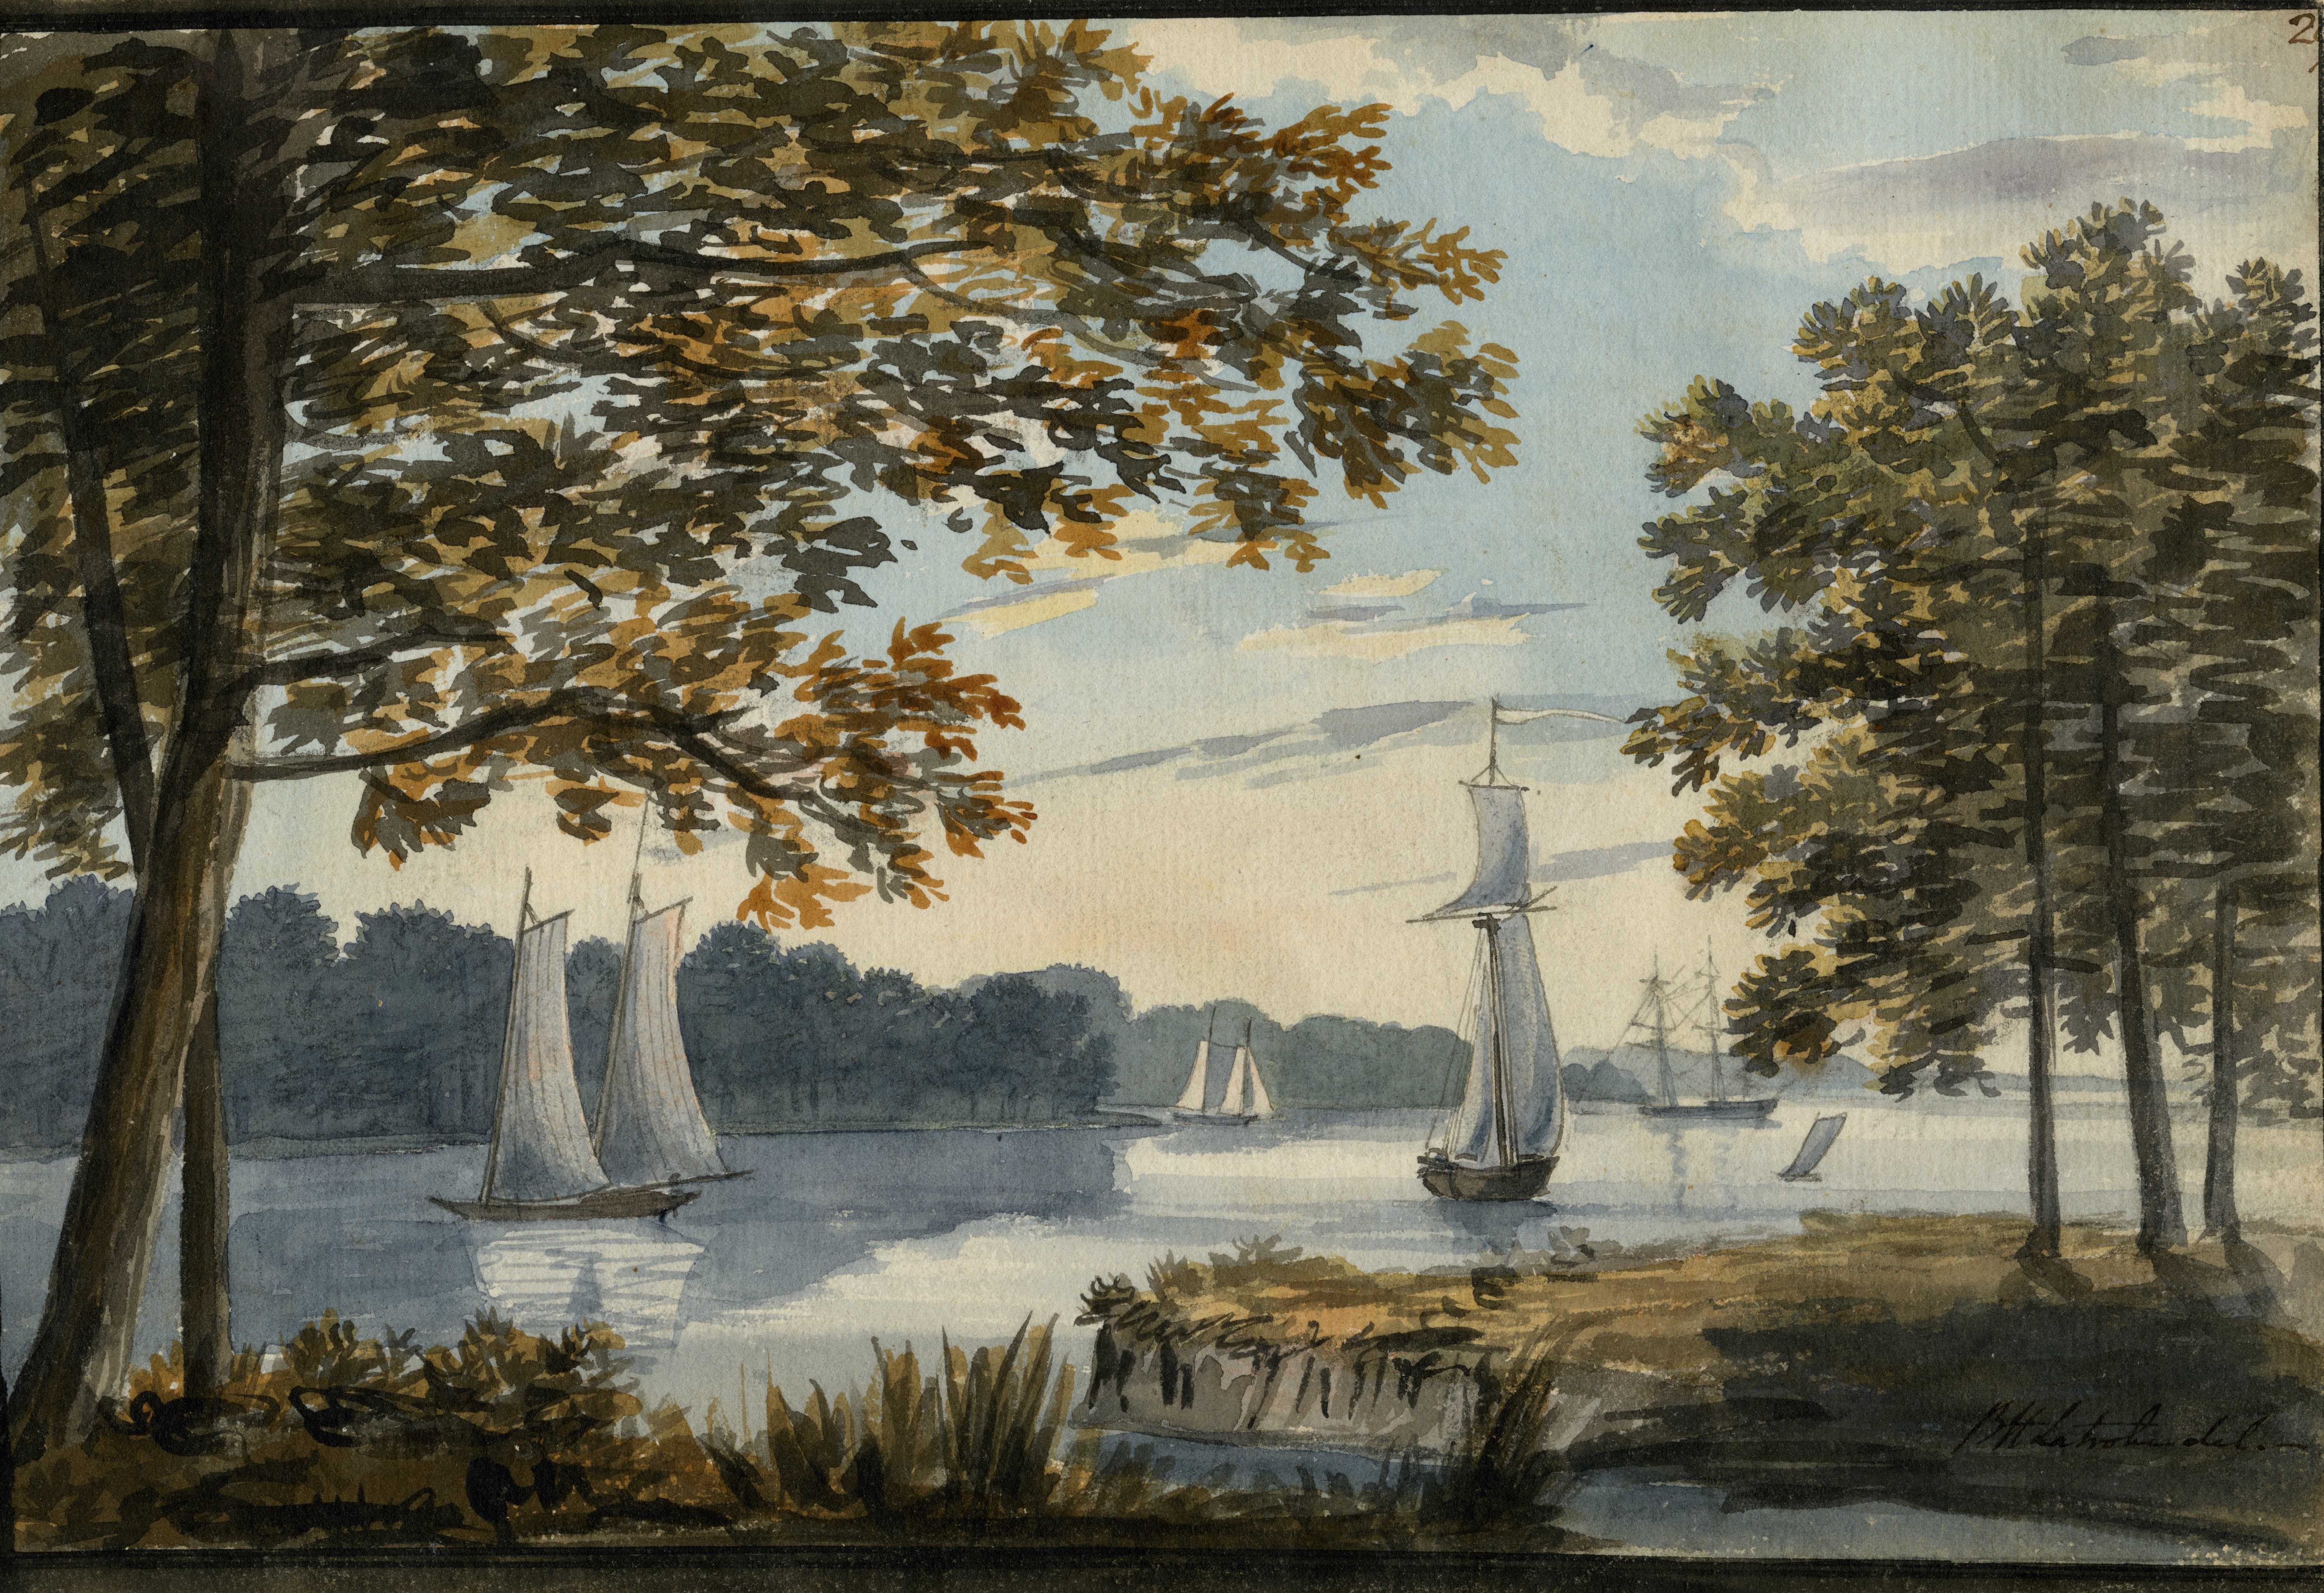 1796, watercolour, 17.7 x 26.6 cm. Collection of Maryland Historical Society (1960-108-1-1-26).